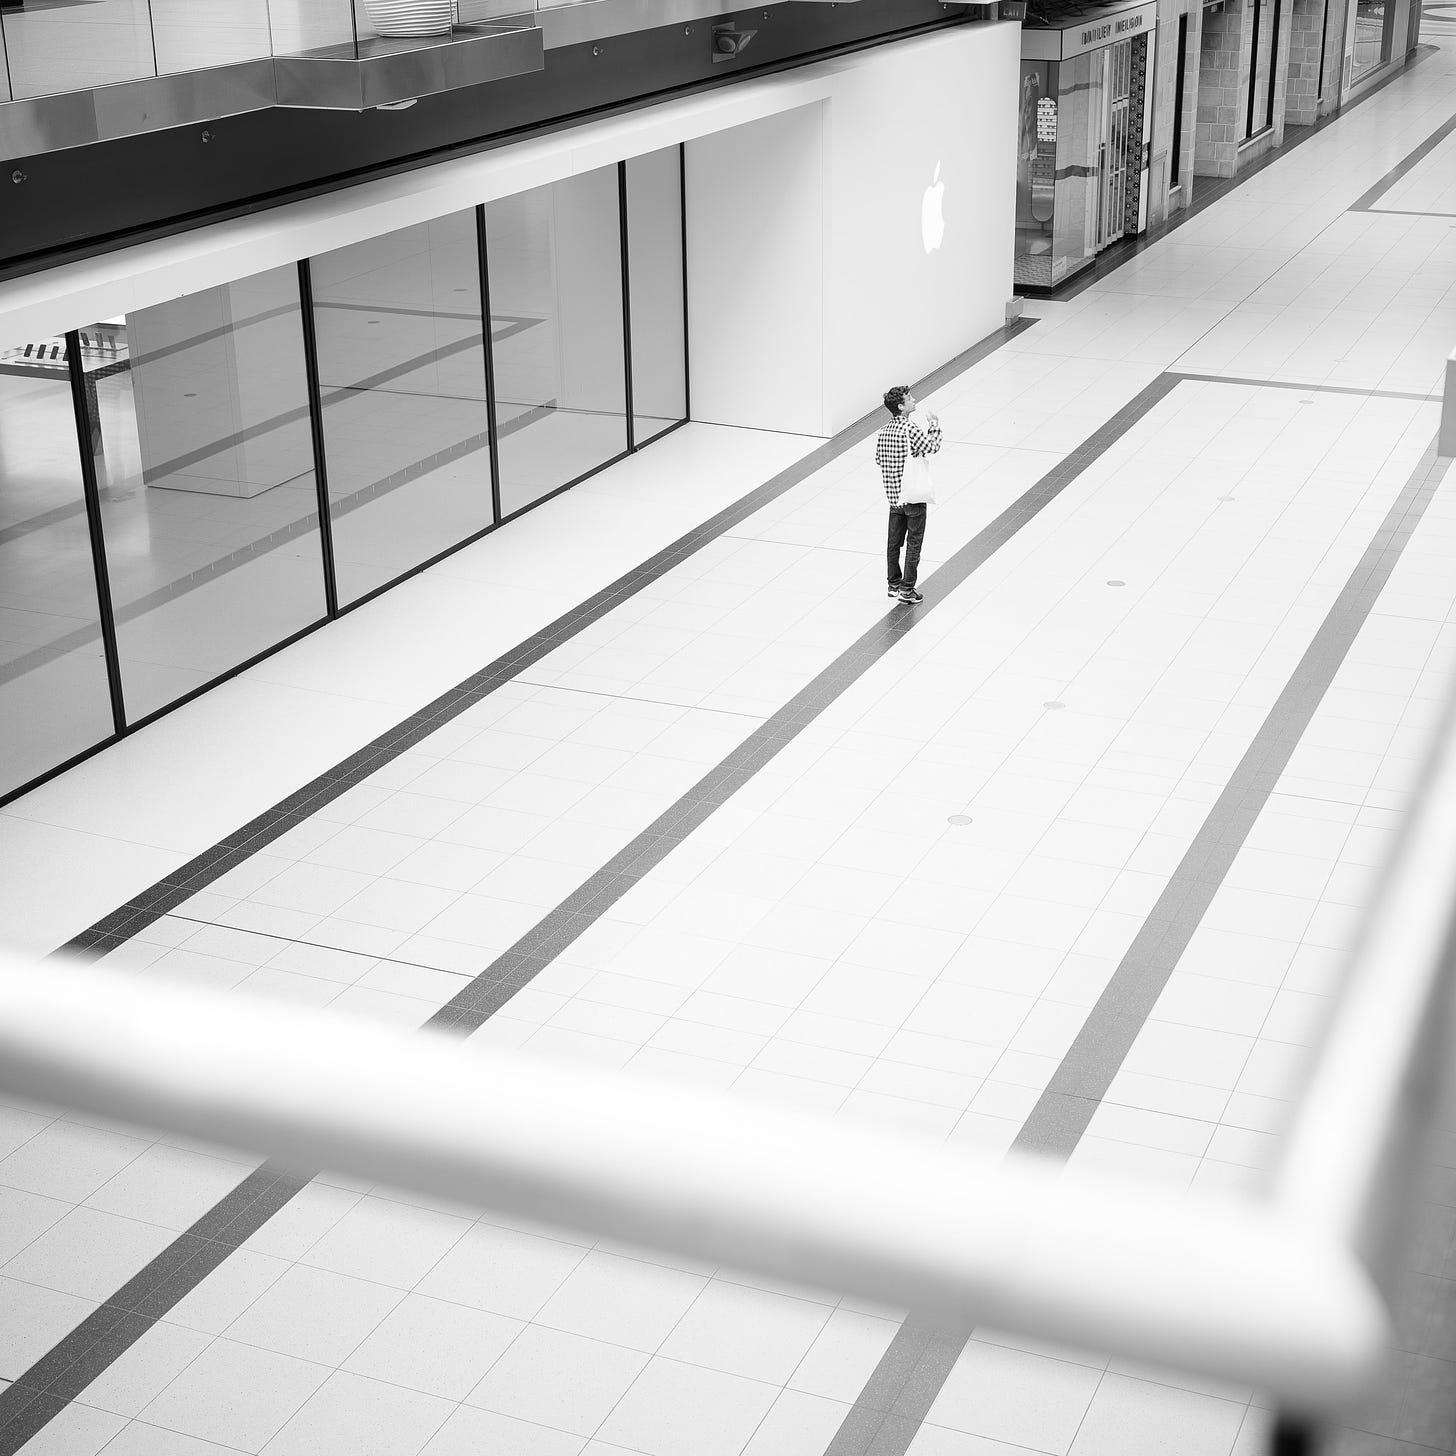 One lonely shopper wanders the halls of Eaton Centre. In the background, Apple Eaton Centre is pictured with all of its doors closed.